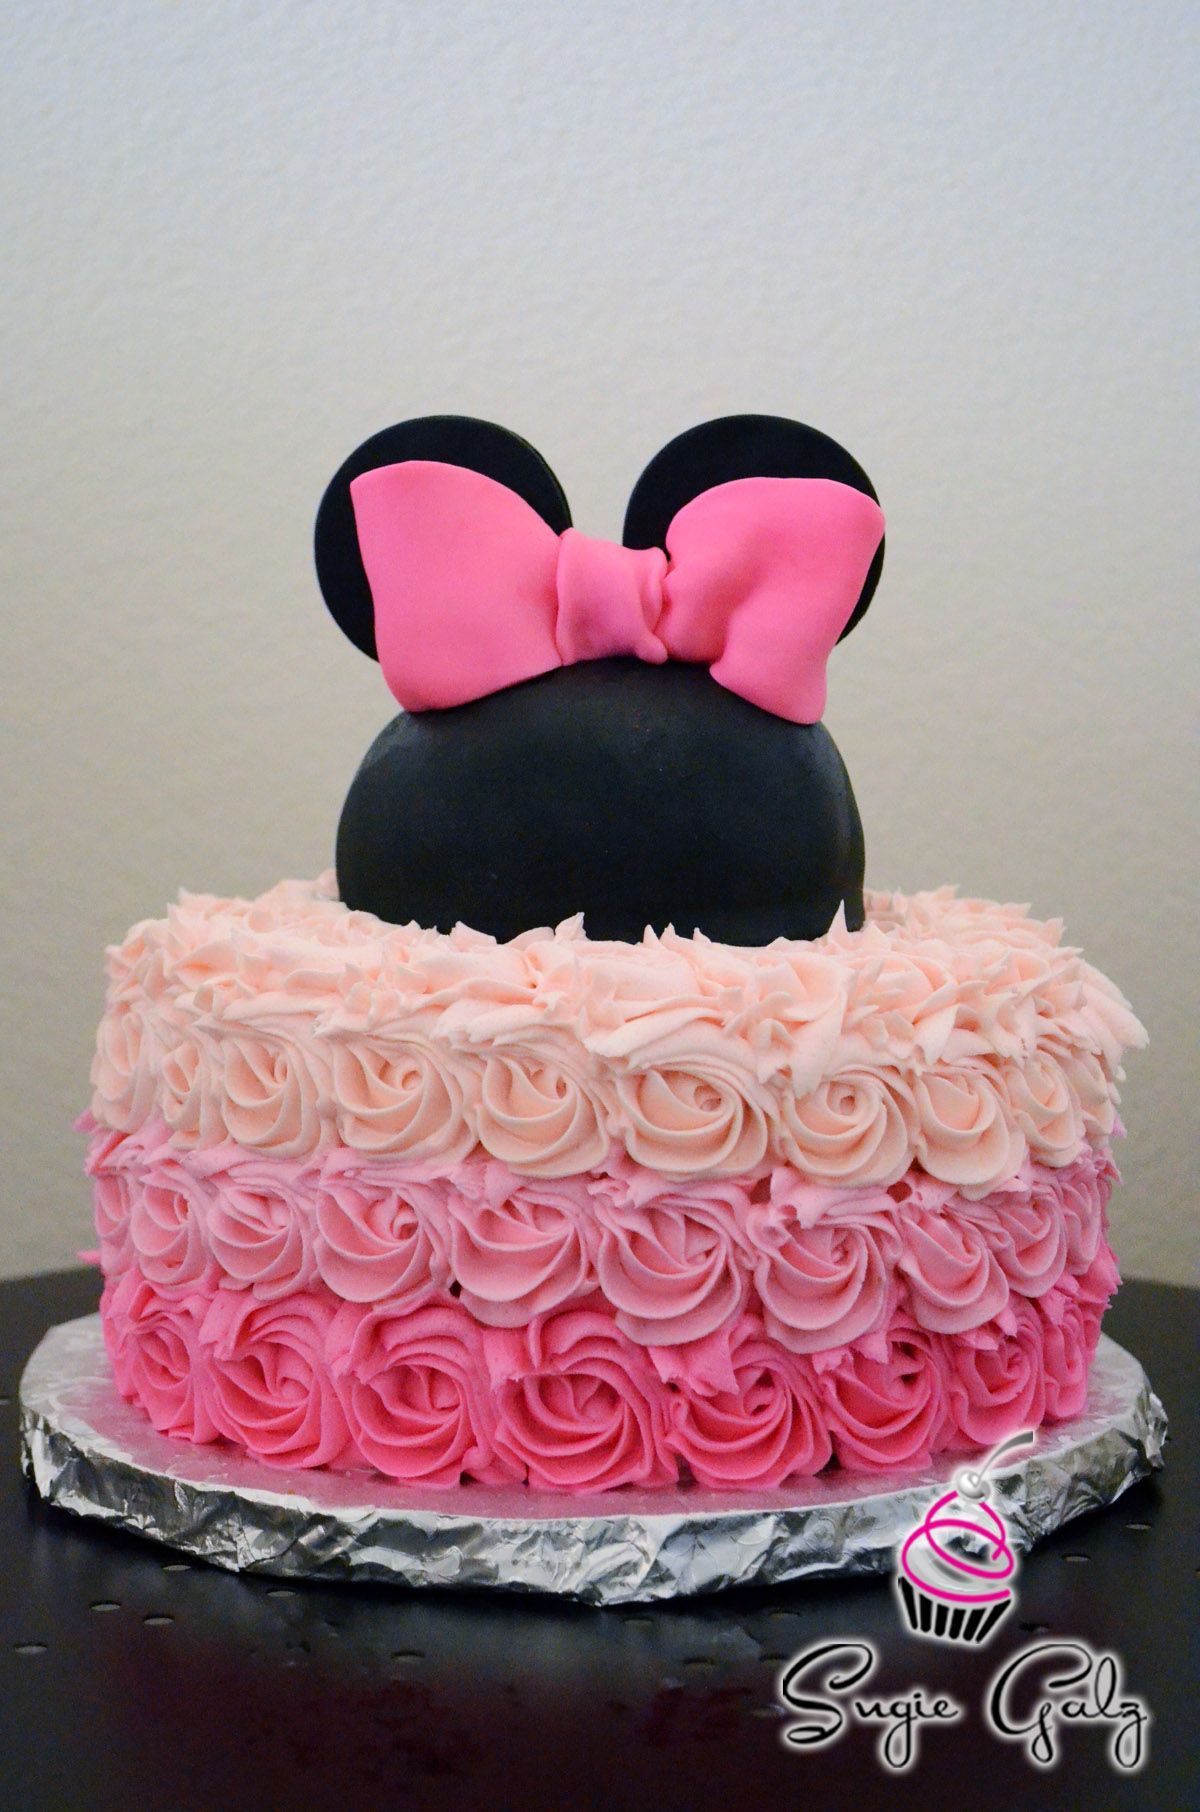 Pretty Pink Ombre Buttercream Minnie Mouse Birthday Cake by Sugie Galz in Austin